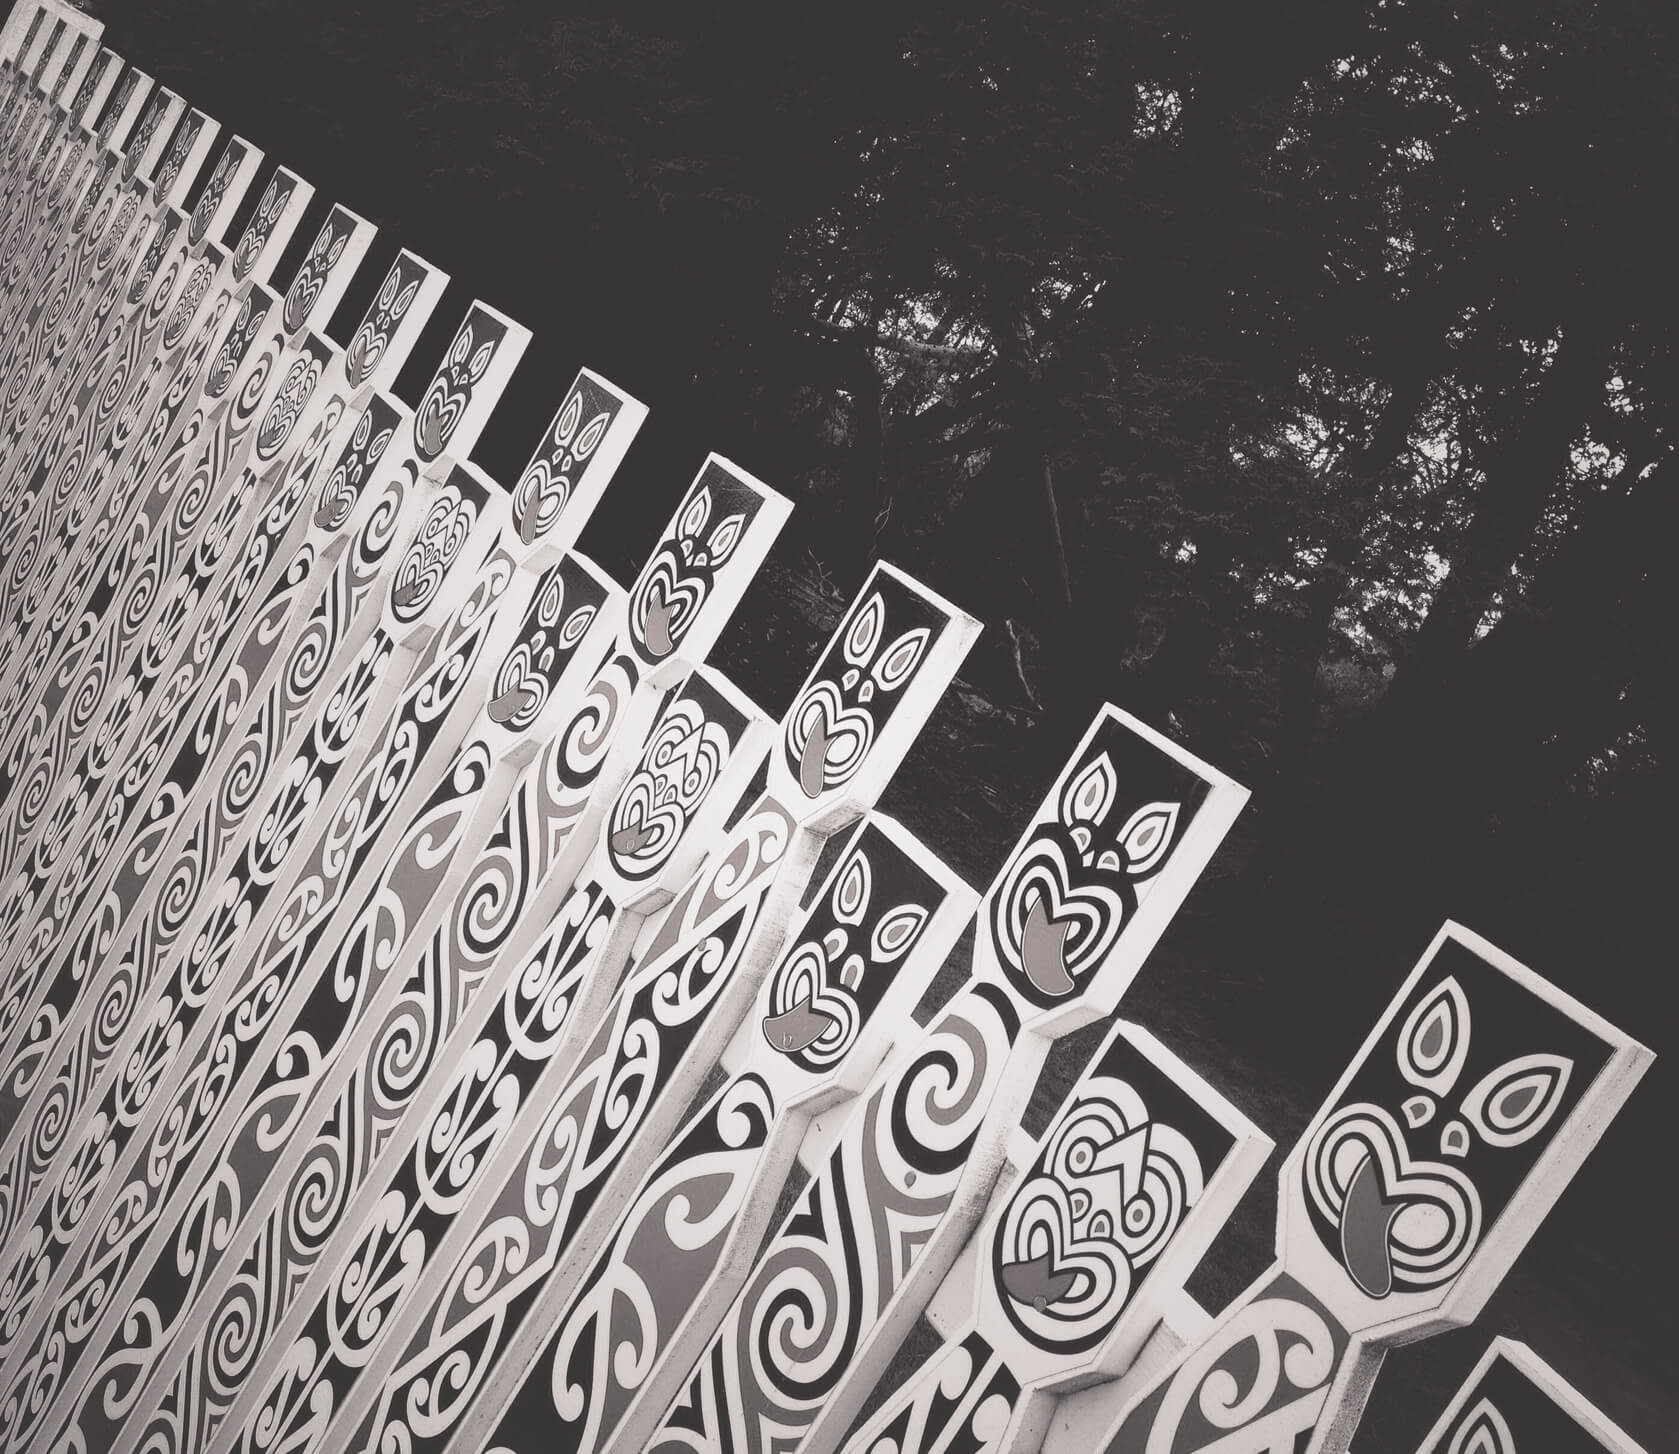 A black and white fence with Maori art is shown